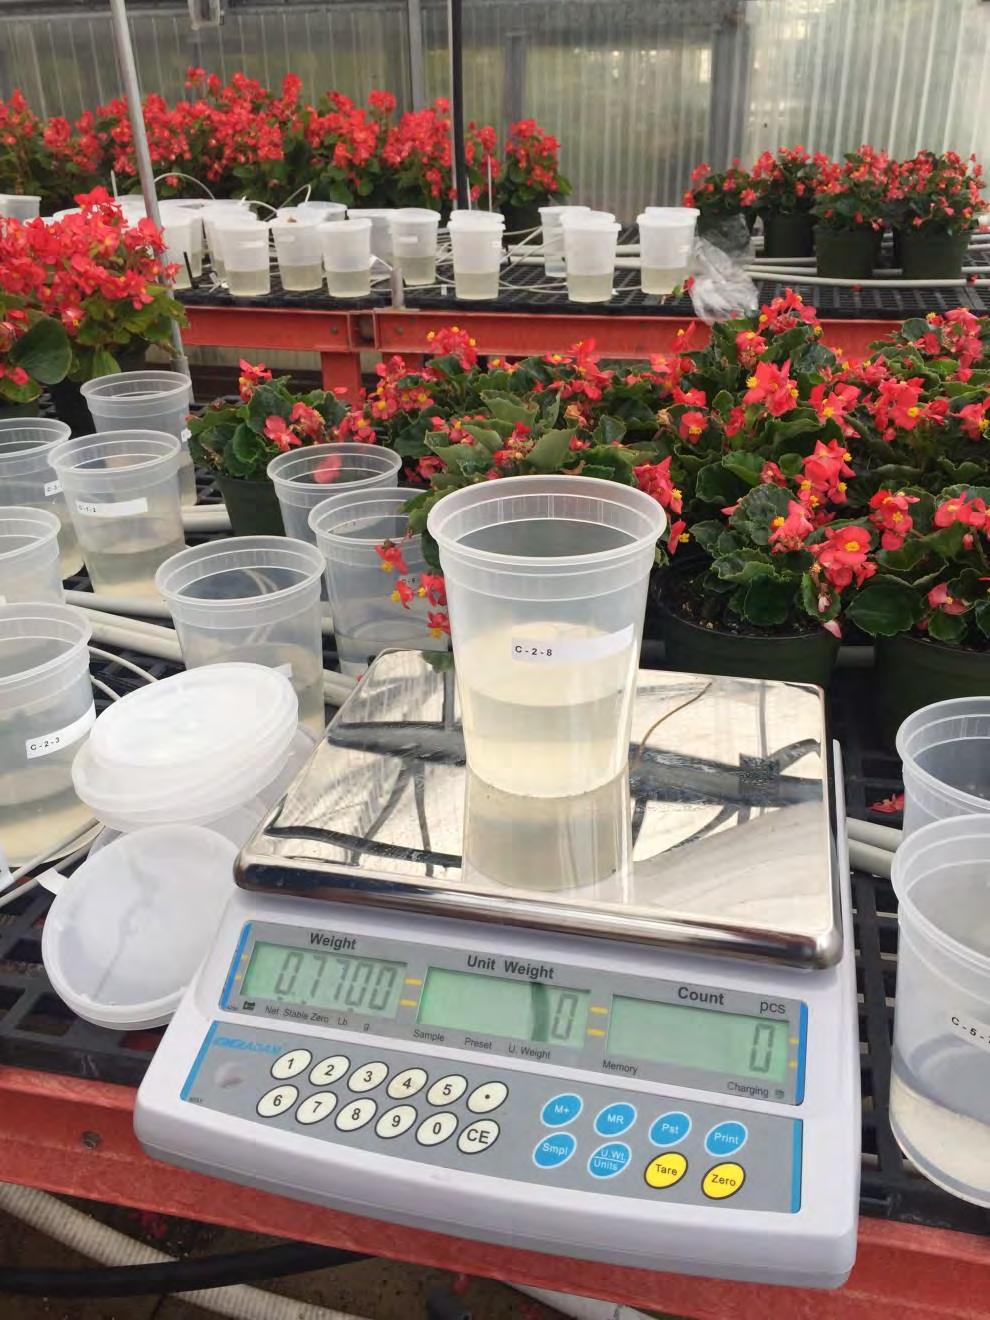 Measured crop growth and dripper flow rate